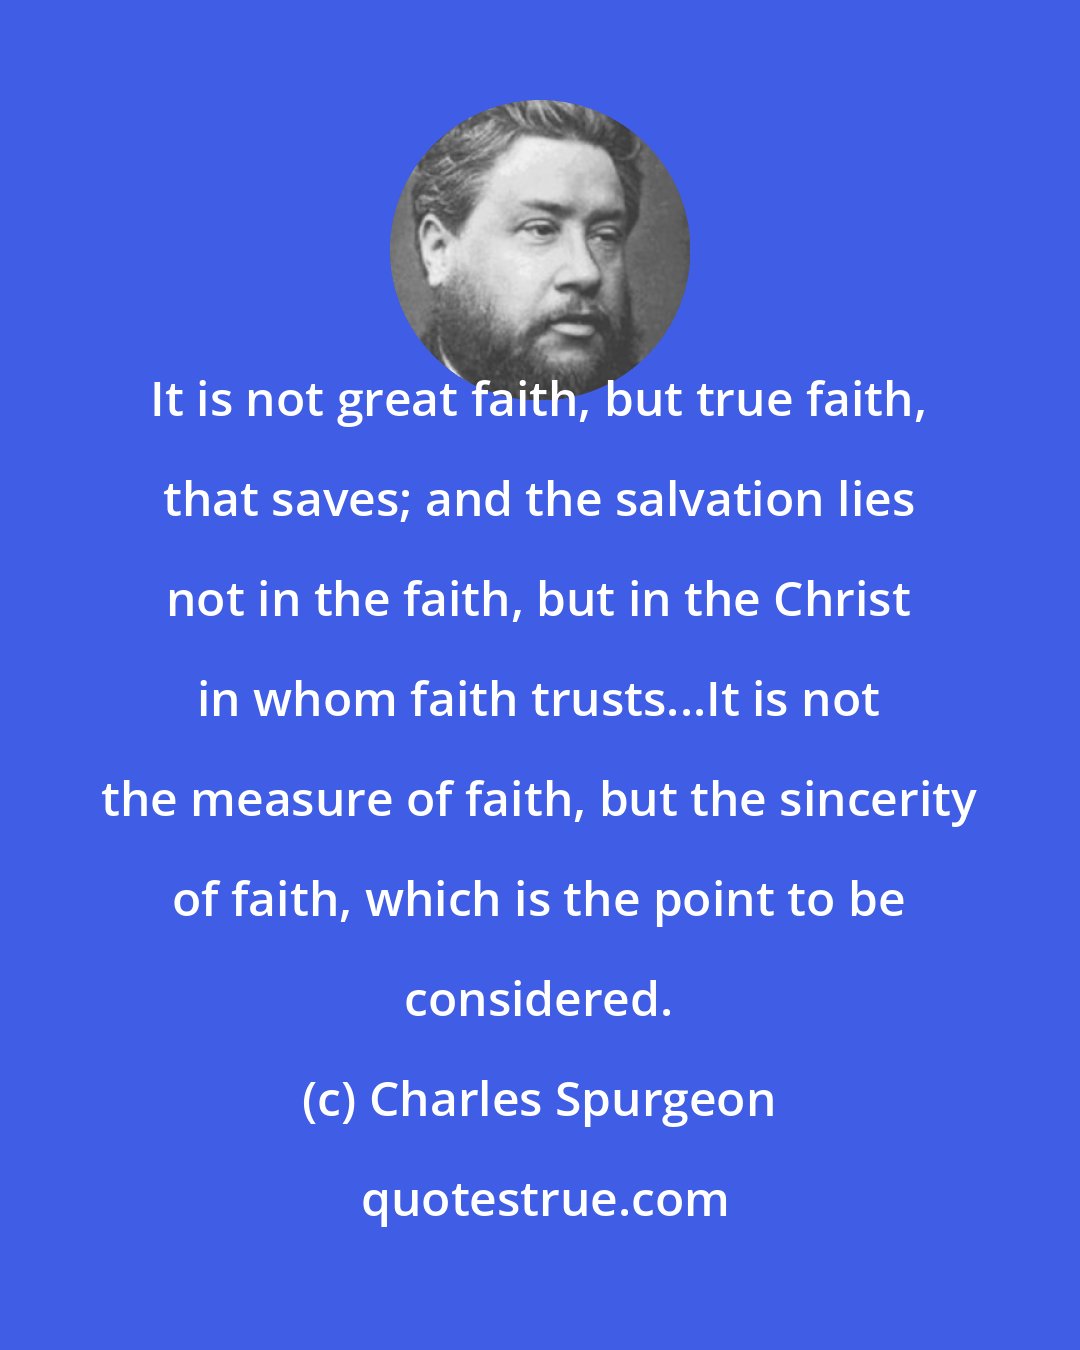 Charles Spurgeon: It is not great faith, but true faith, that saves; and the salvation lies not in the faith, but in the Christ in whom faith trusts...It is not the measure of faith, but the sincerity of faith, which is the point to be considered.